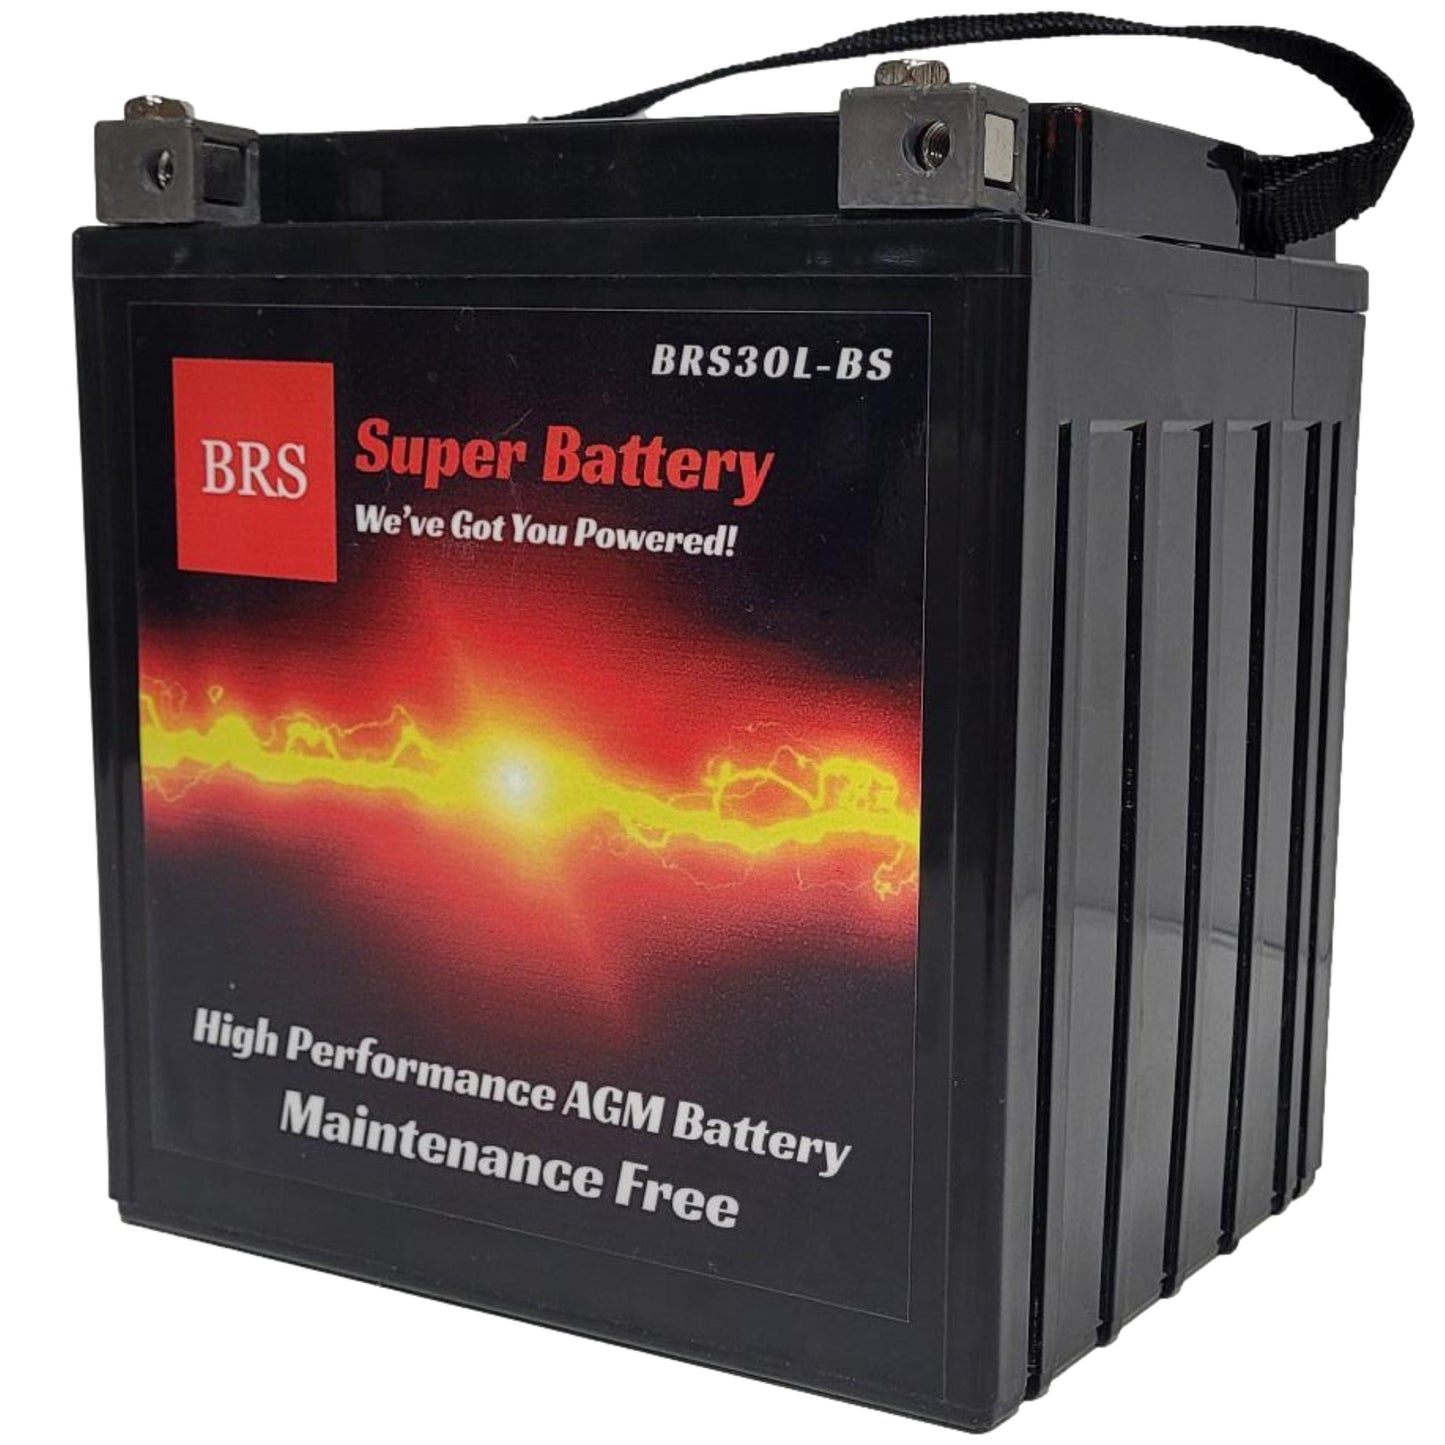 High Performance BRS30L-BS 10 Year Battery & Smart Charger / Maintainer Combo Bundle Kit 12v Sealed AGM PowerSports Battery - BRS Super Battery